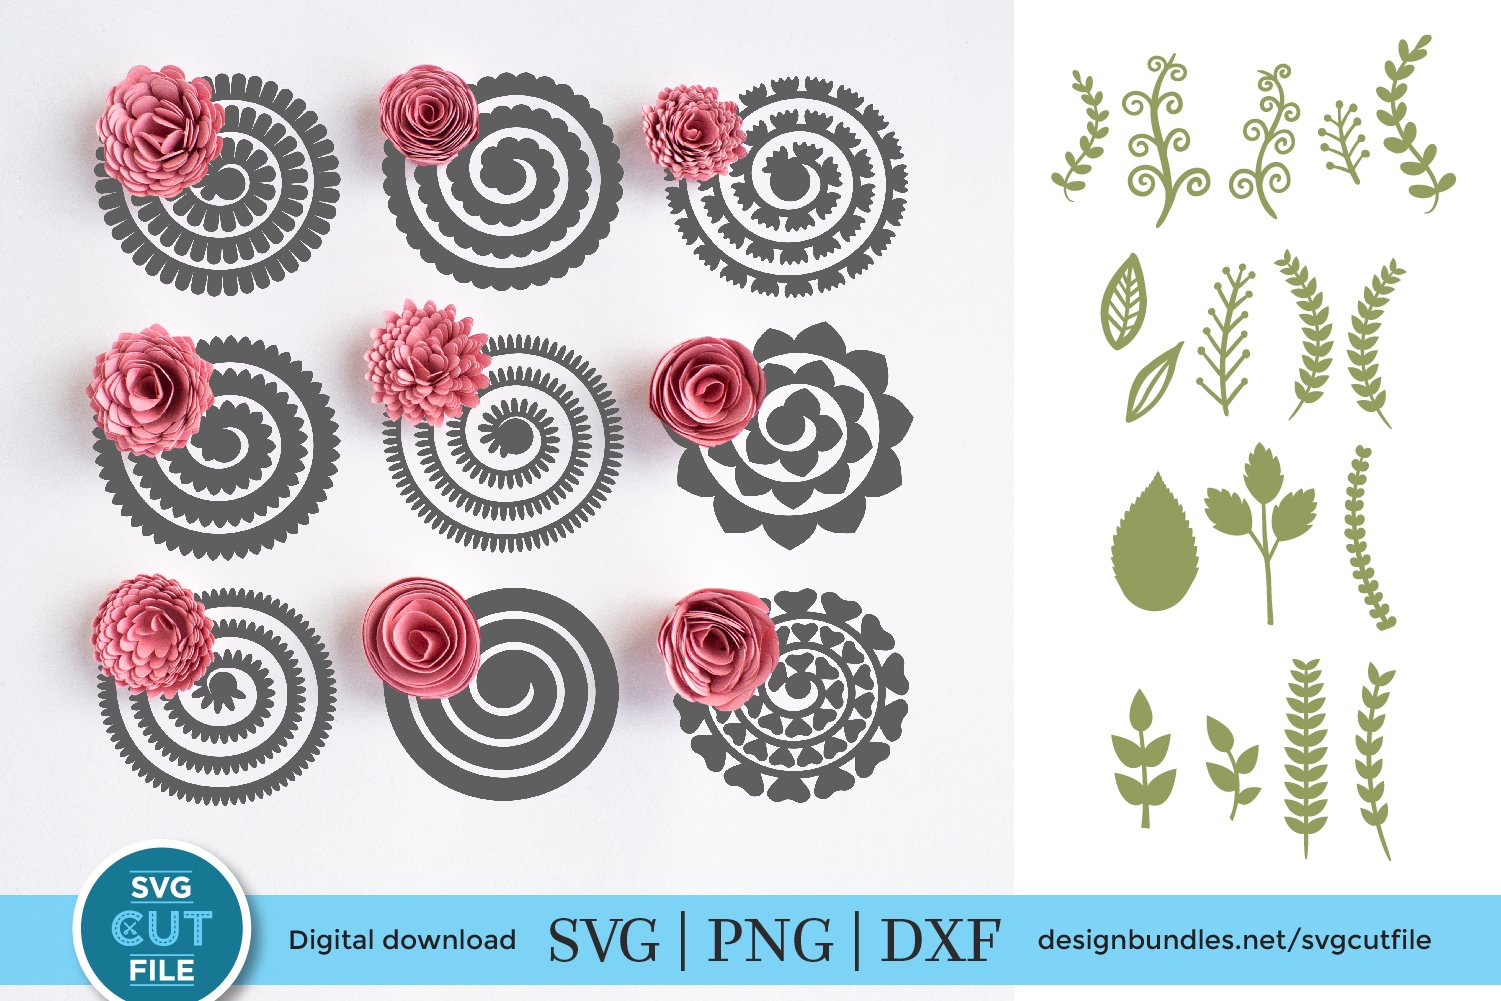 Rolled flowers with ornaments on the wooden background.